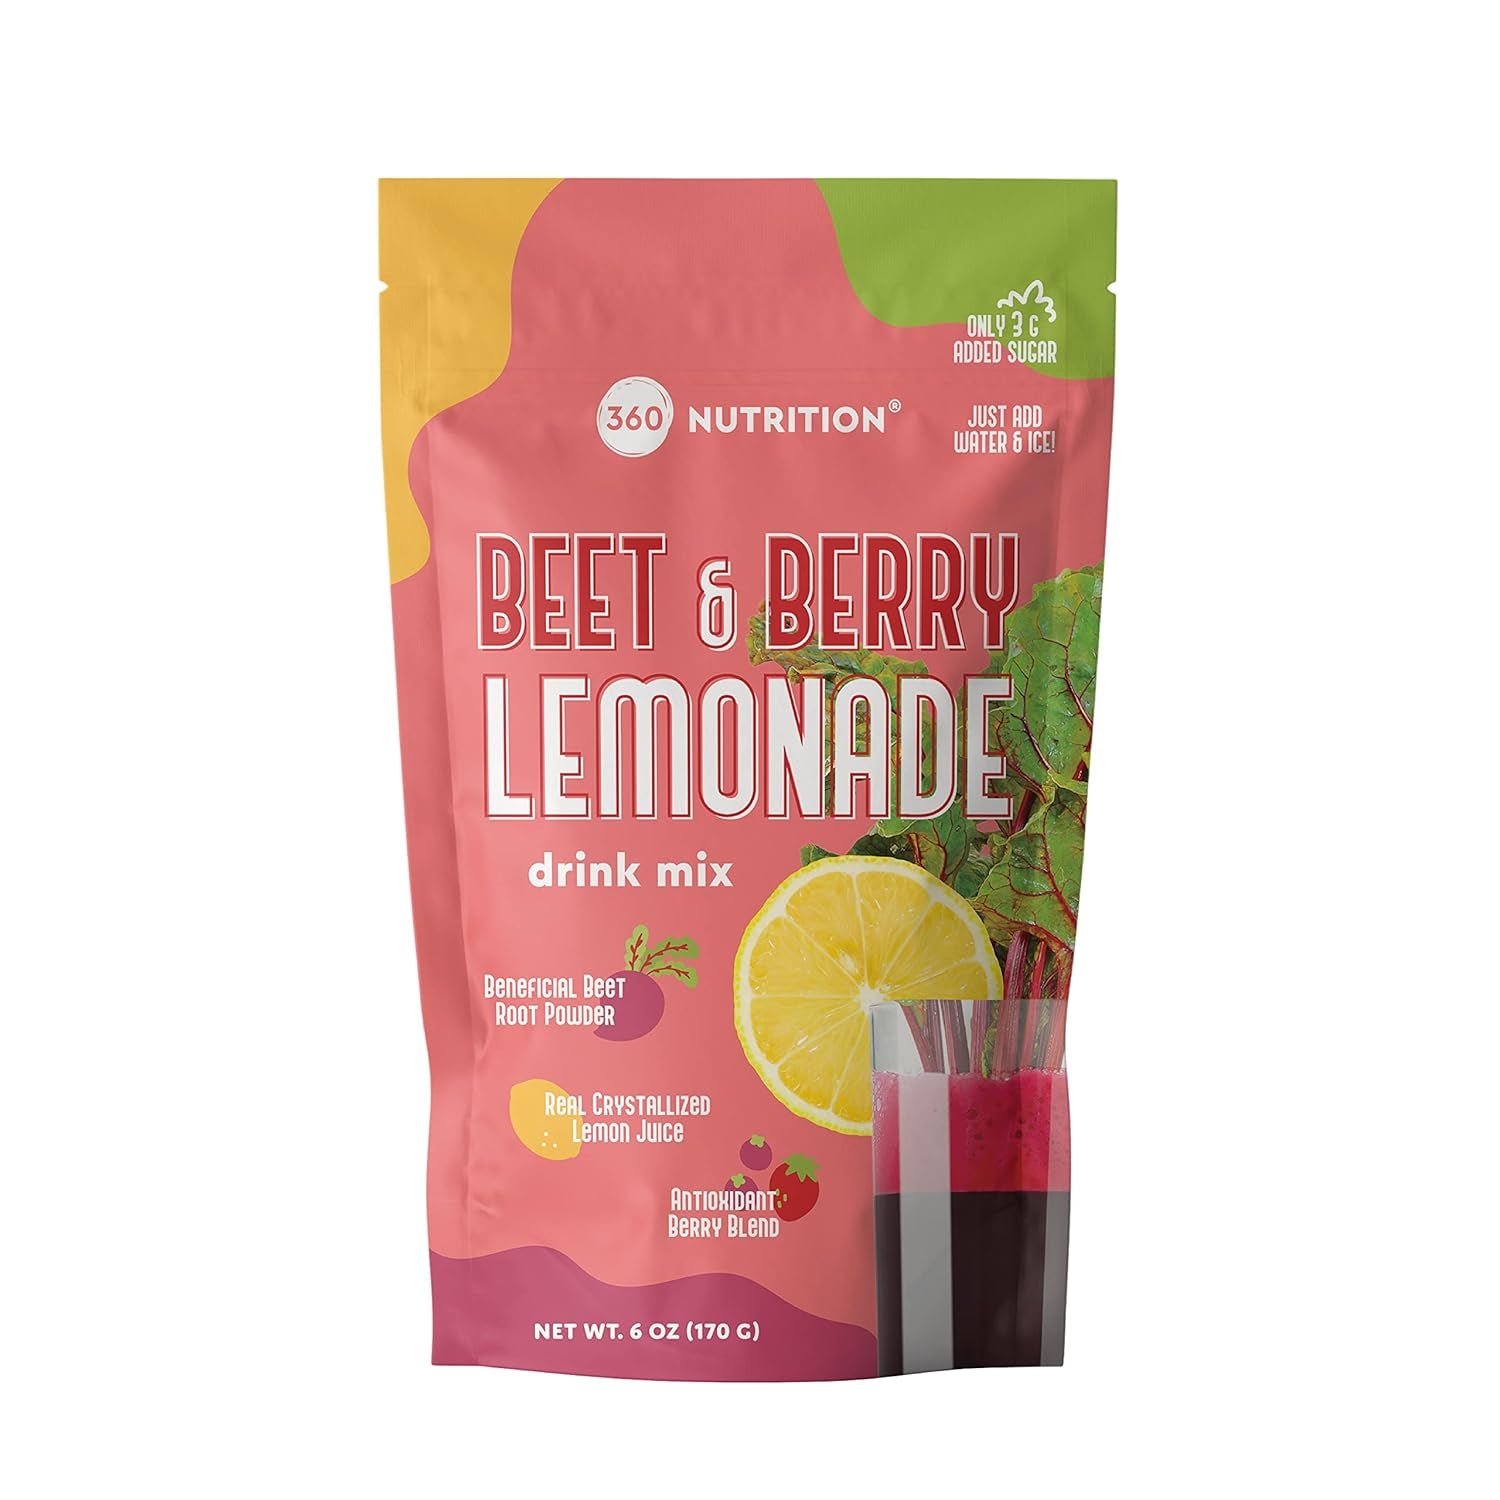 "Berry Lemonade Superfood Mix with Beet Root Powder - Antioxidant Rich Smoothie Blend"